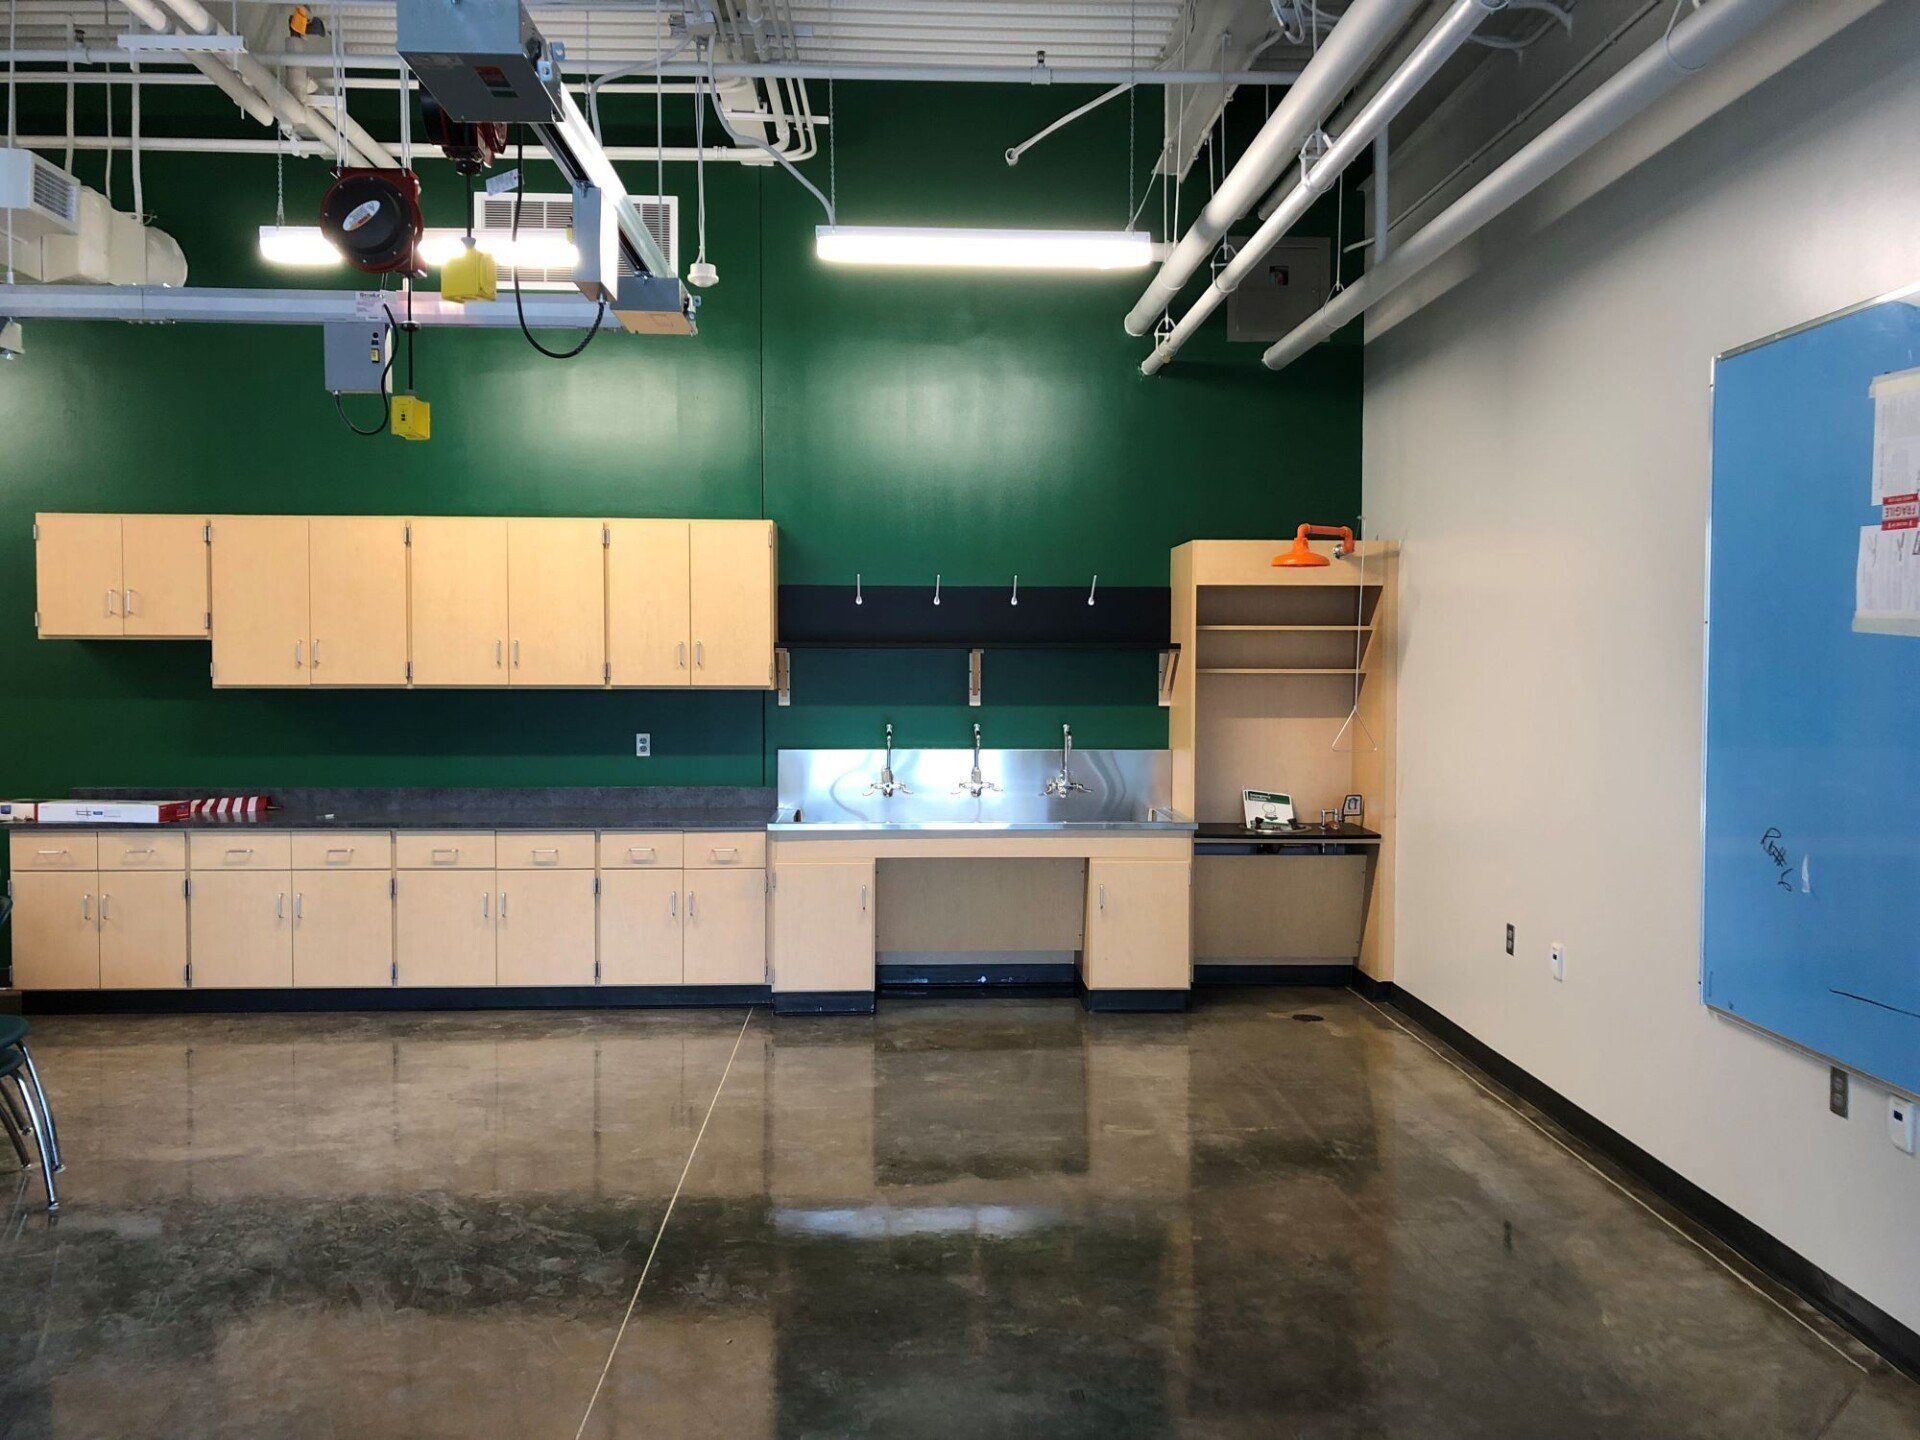 image of classroom storage space